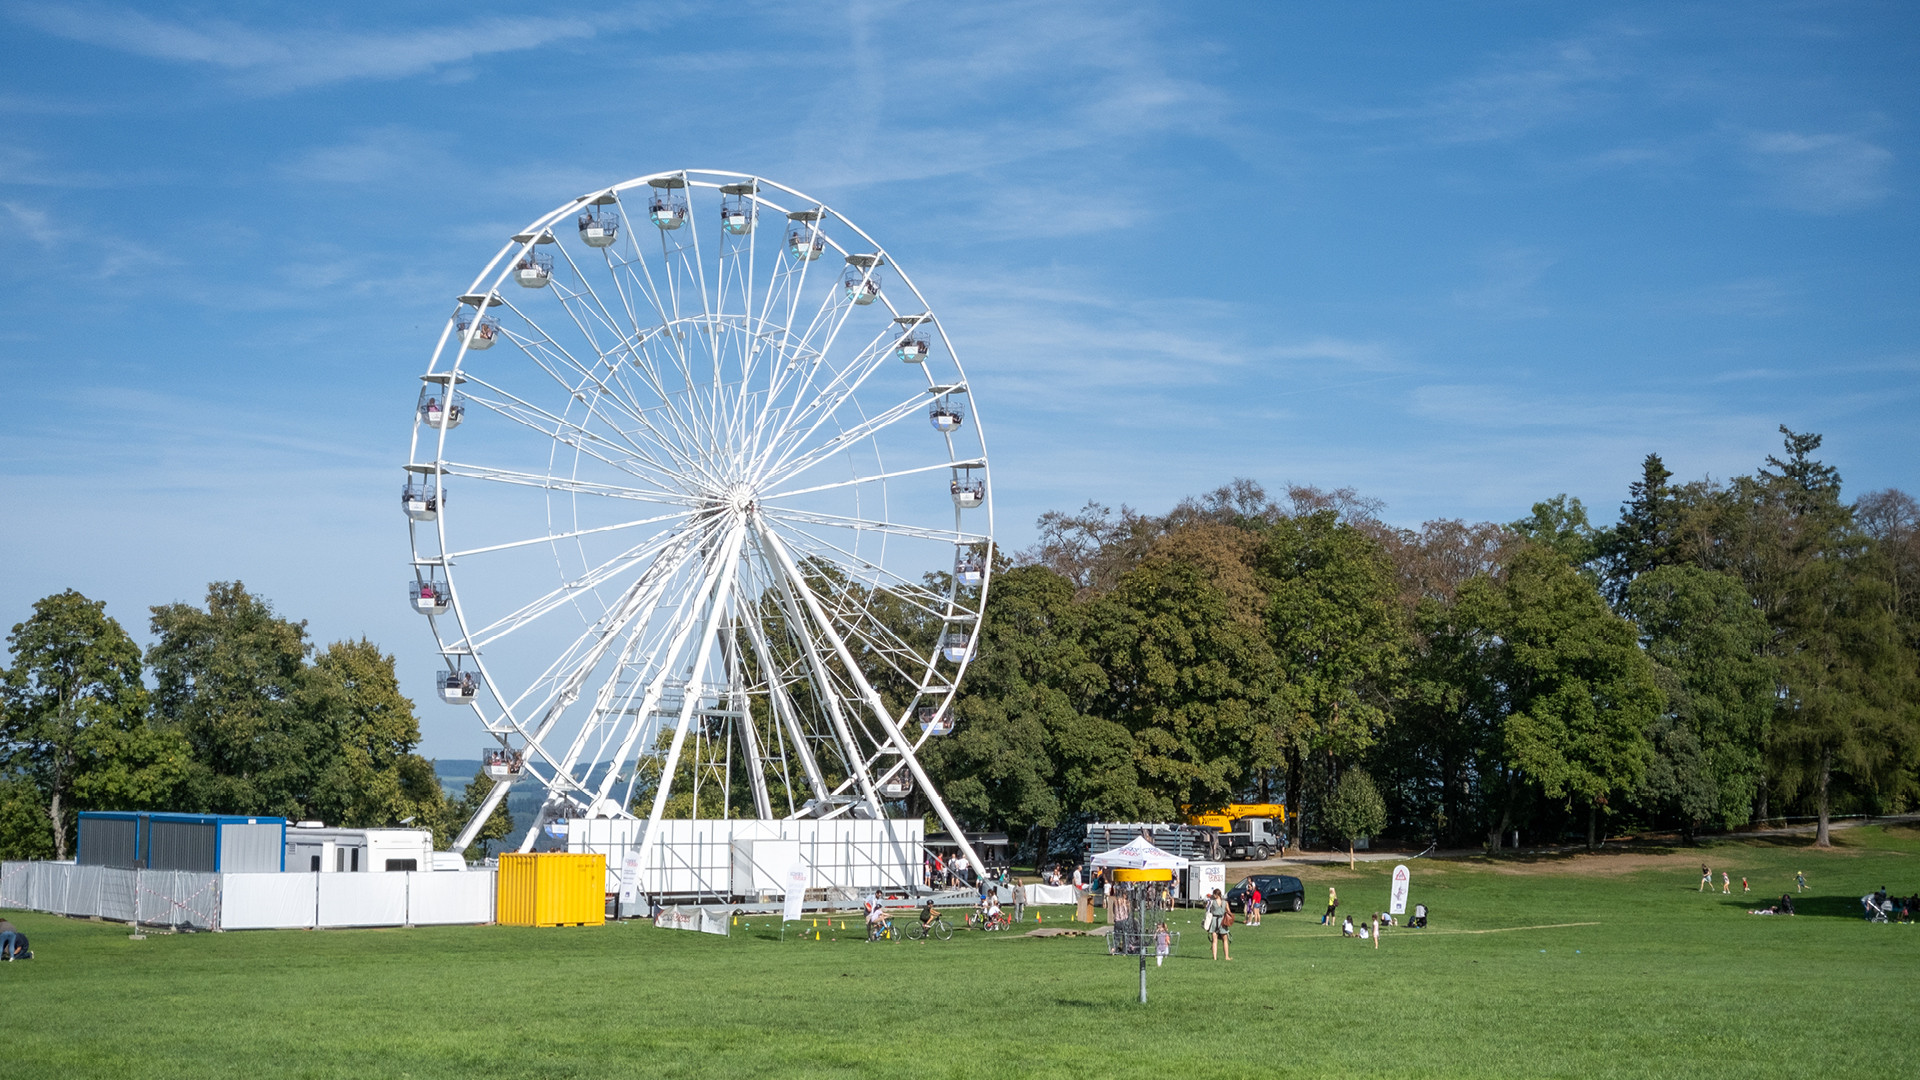  The white Ferris wheel with many visitors.